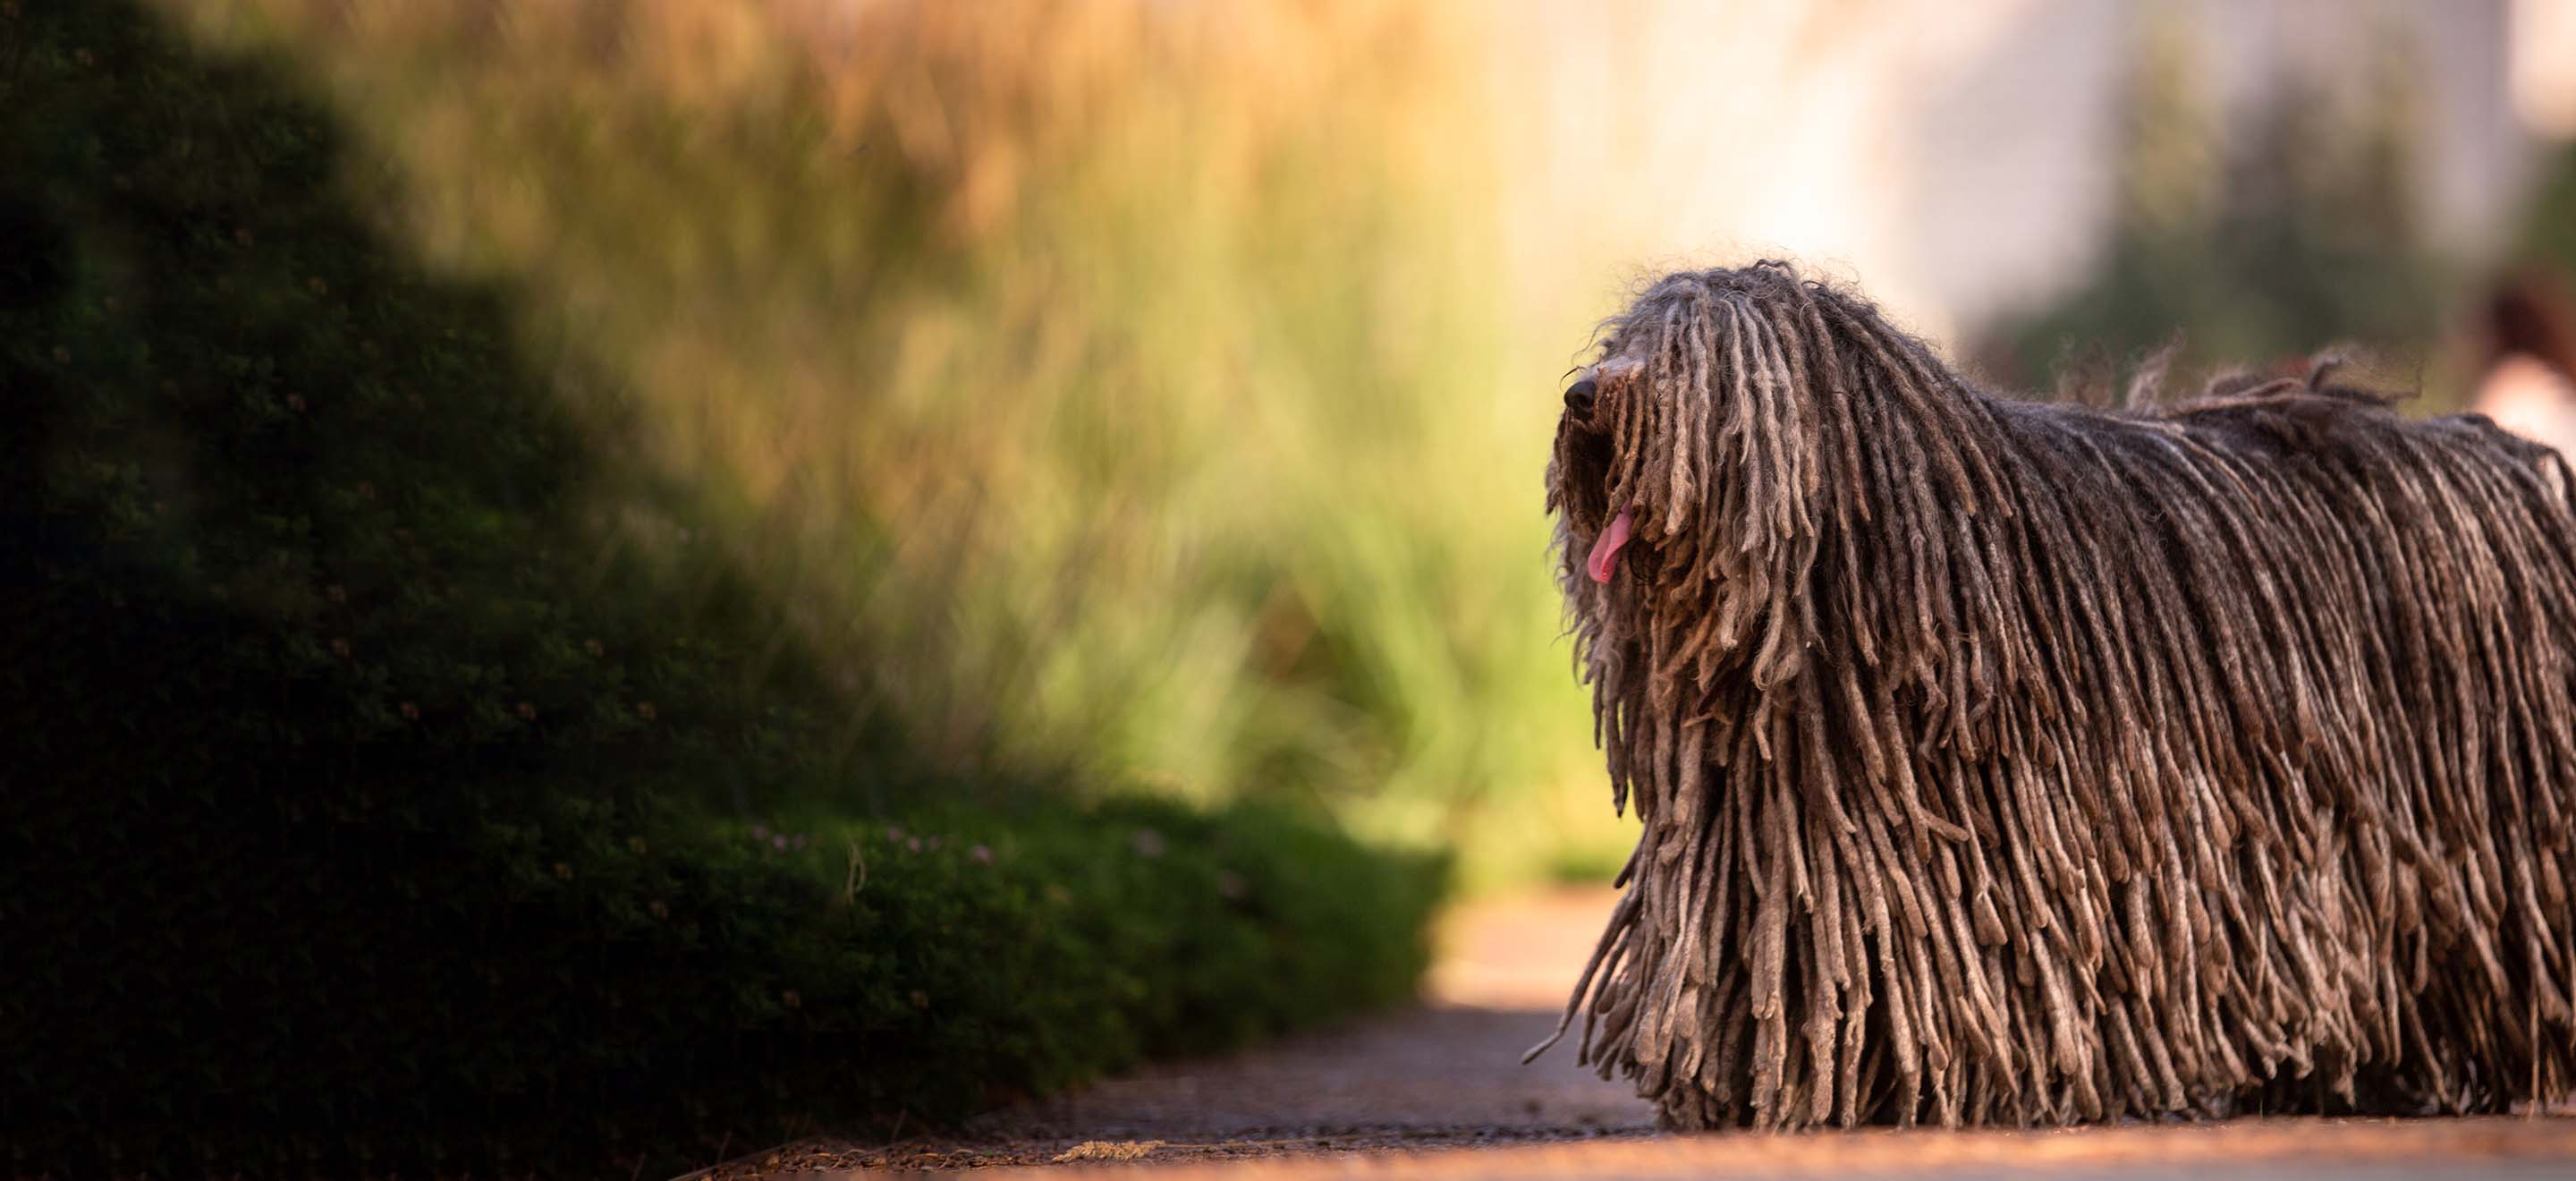 Brown Puli dog standing on a garden path image